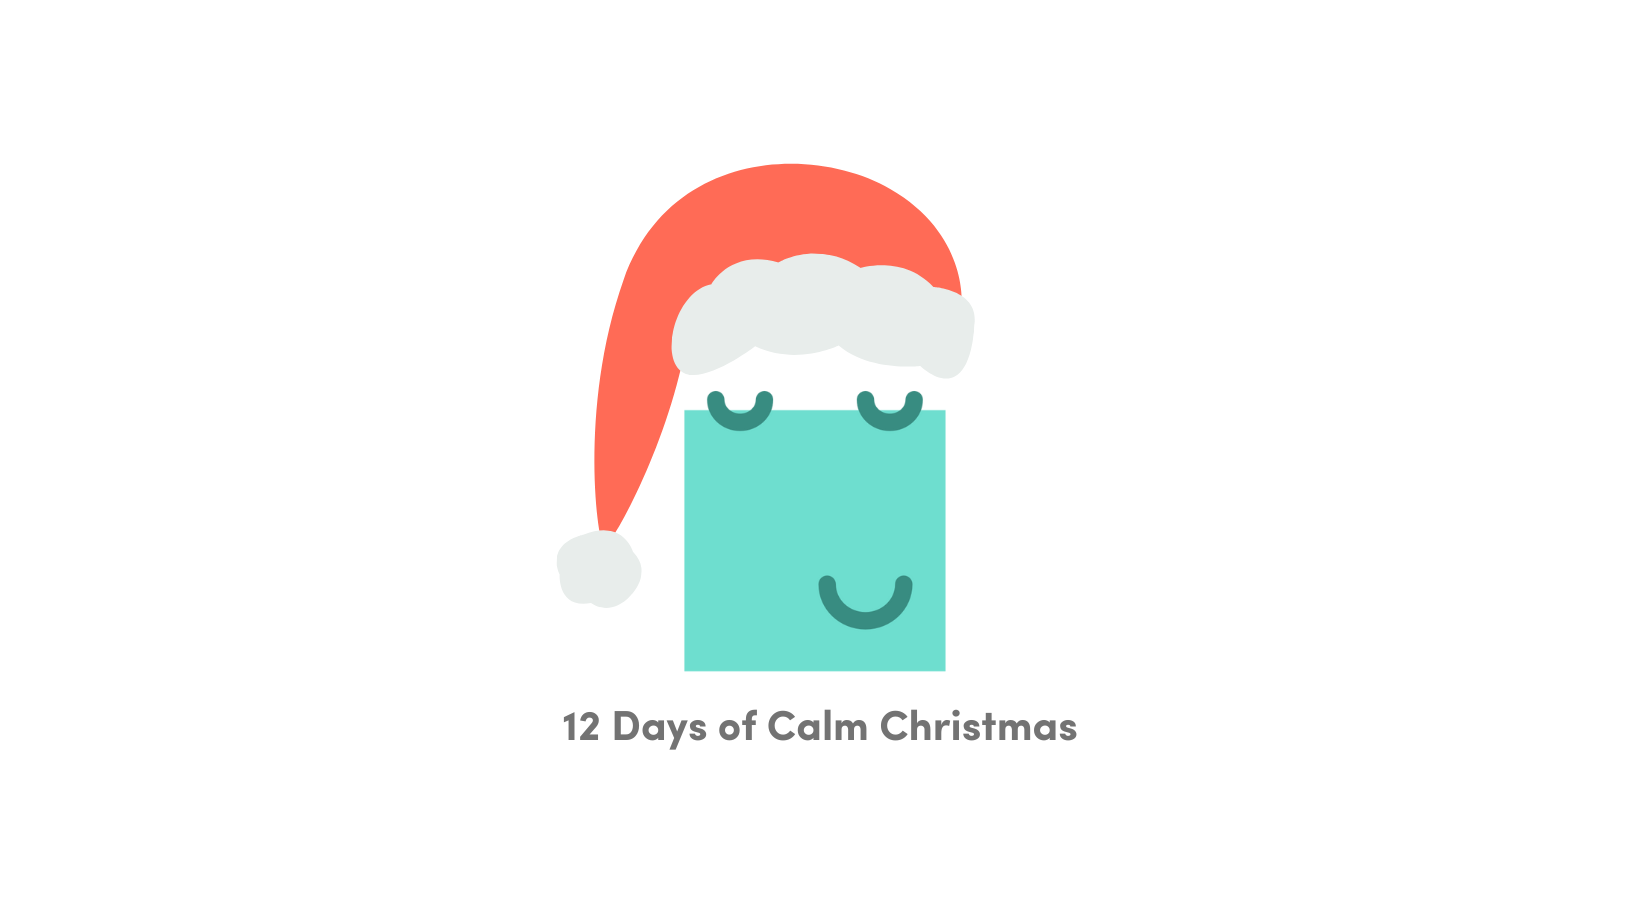 Graphic. A green box with a smiling face has eyes closed and is wearing a santa hat. Underneath it reads '12 Days of Calm Christmas'